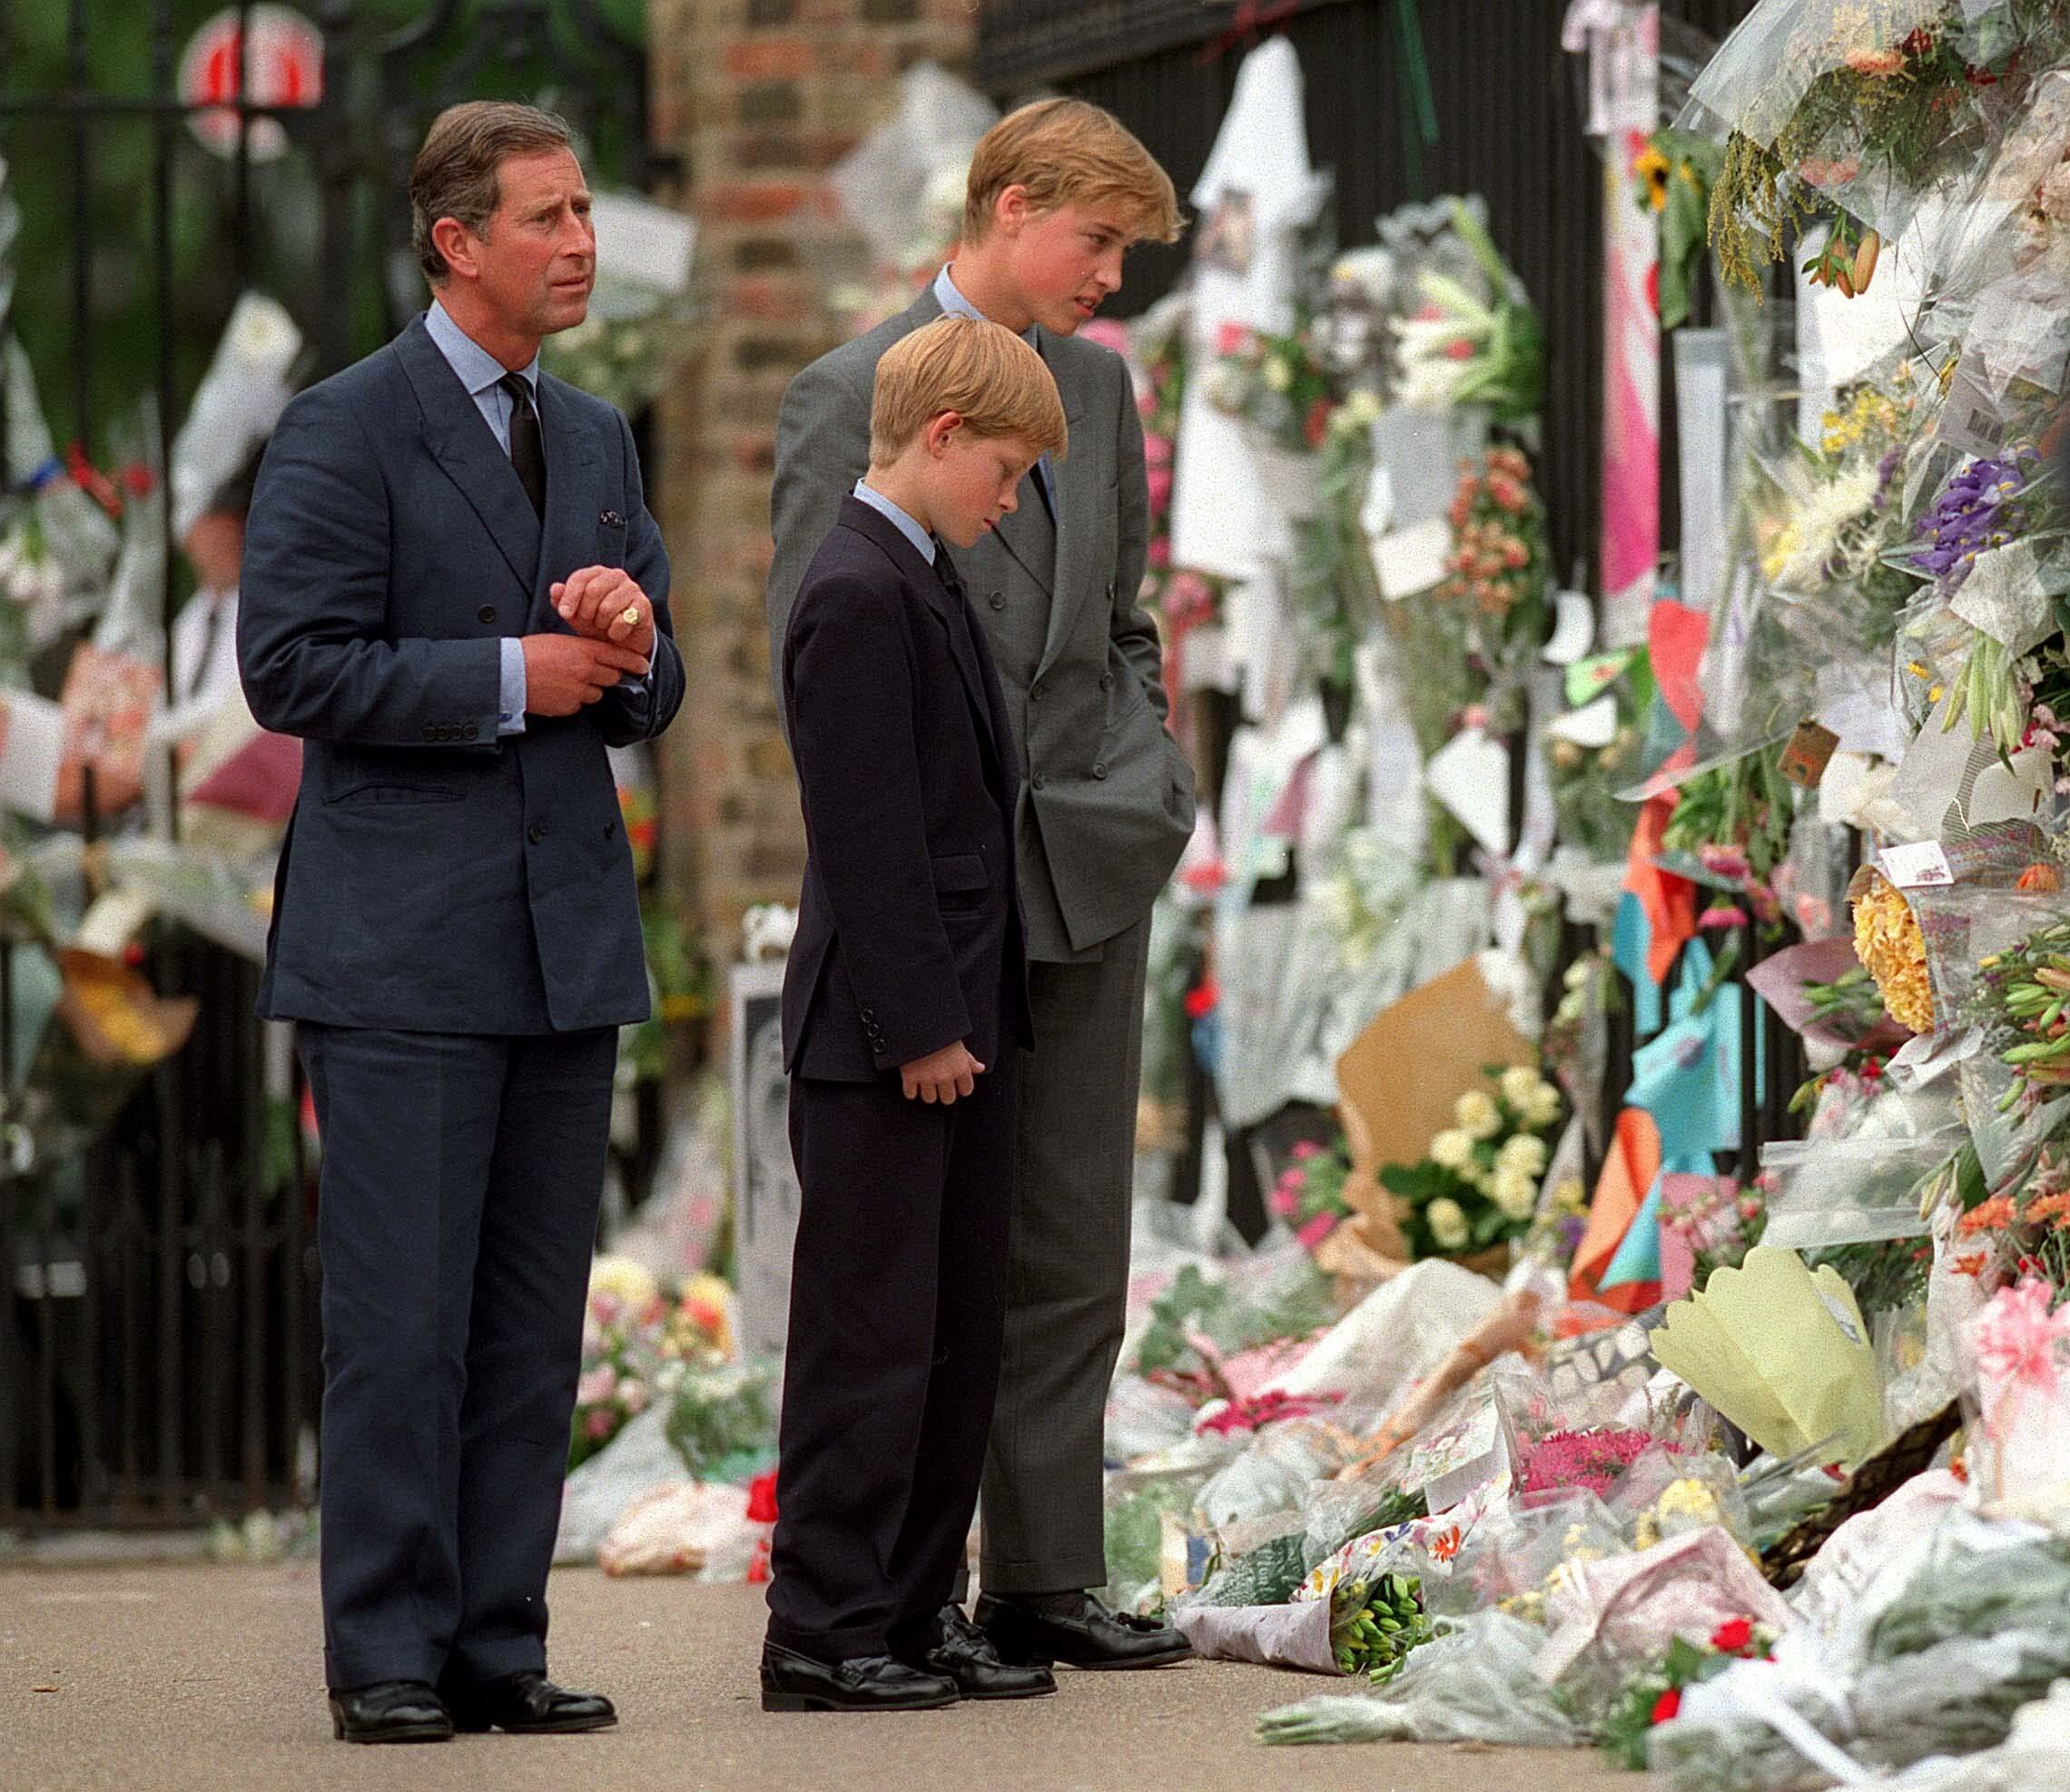 The Prince of Wales, Prince William and Prince Harry look at floral tributes to Diana, Princess of Wales outside Kensington Palace on September 5, 1997 in London, England. | Source: Anwar Hussein/Getty Images